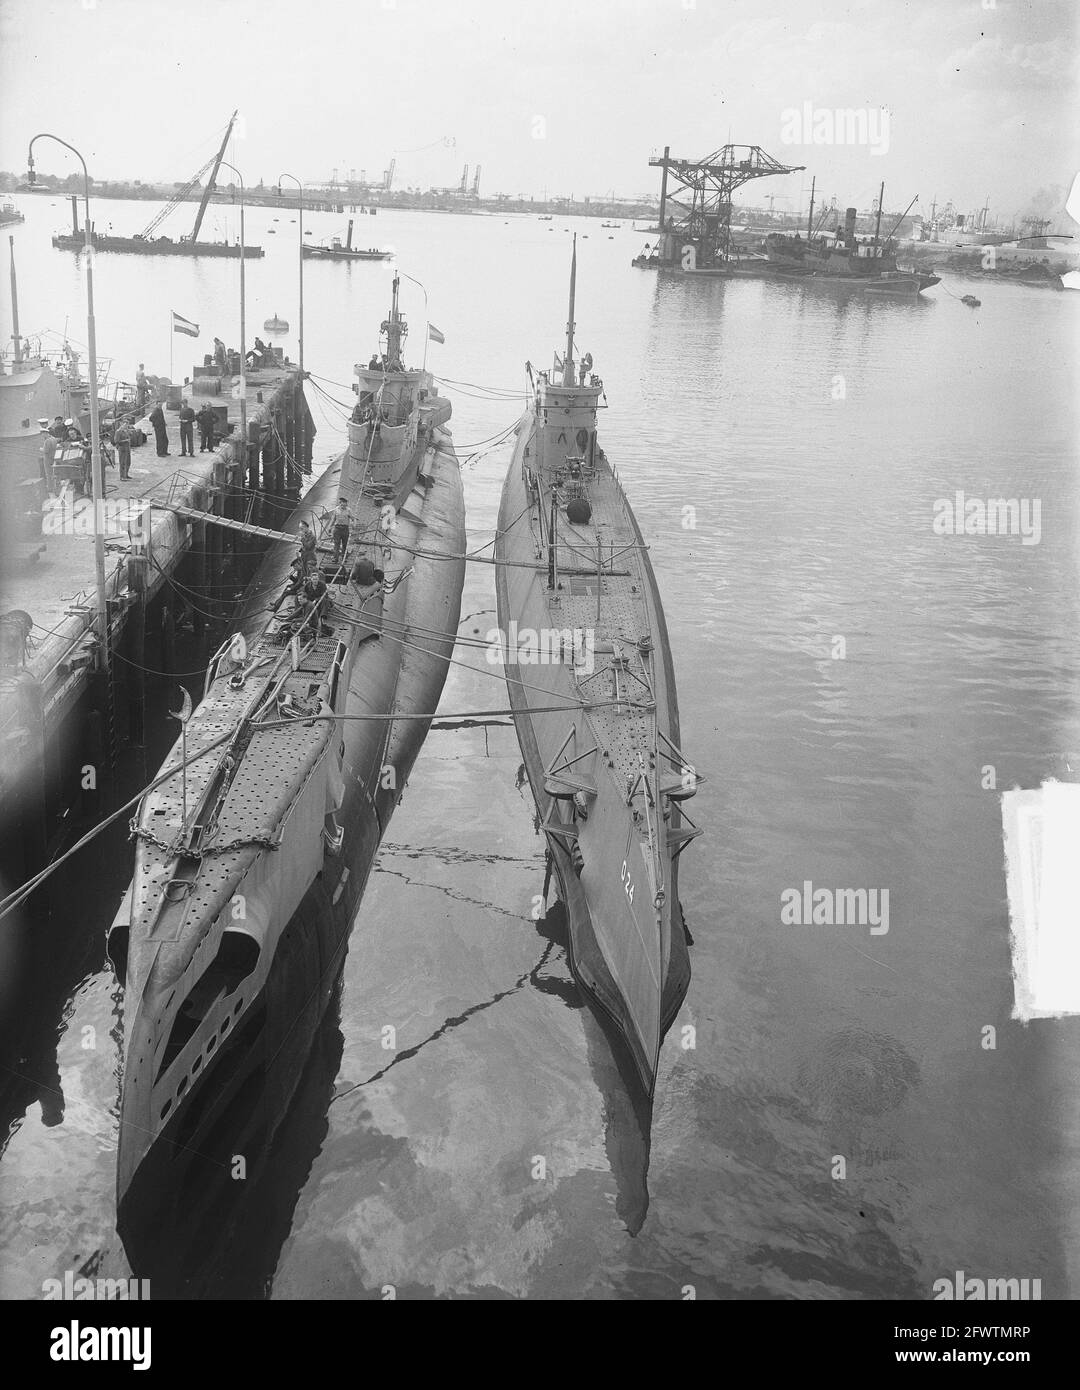 Submarine service Waalhaven for Marvo, June 1, 1949, UNDERSTANDING, The Netherlands, 20th century press agency photo, news to remember, documentary, historic photography 1945-1990, visual stories, human history of the Twentieth Century, capturing moments in time Stock Photo